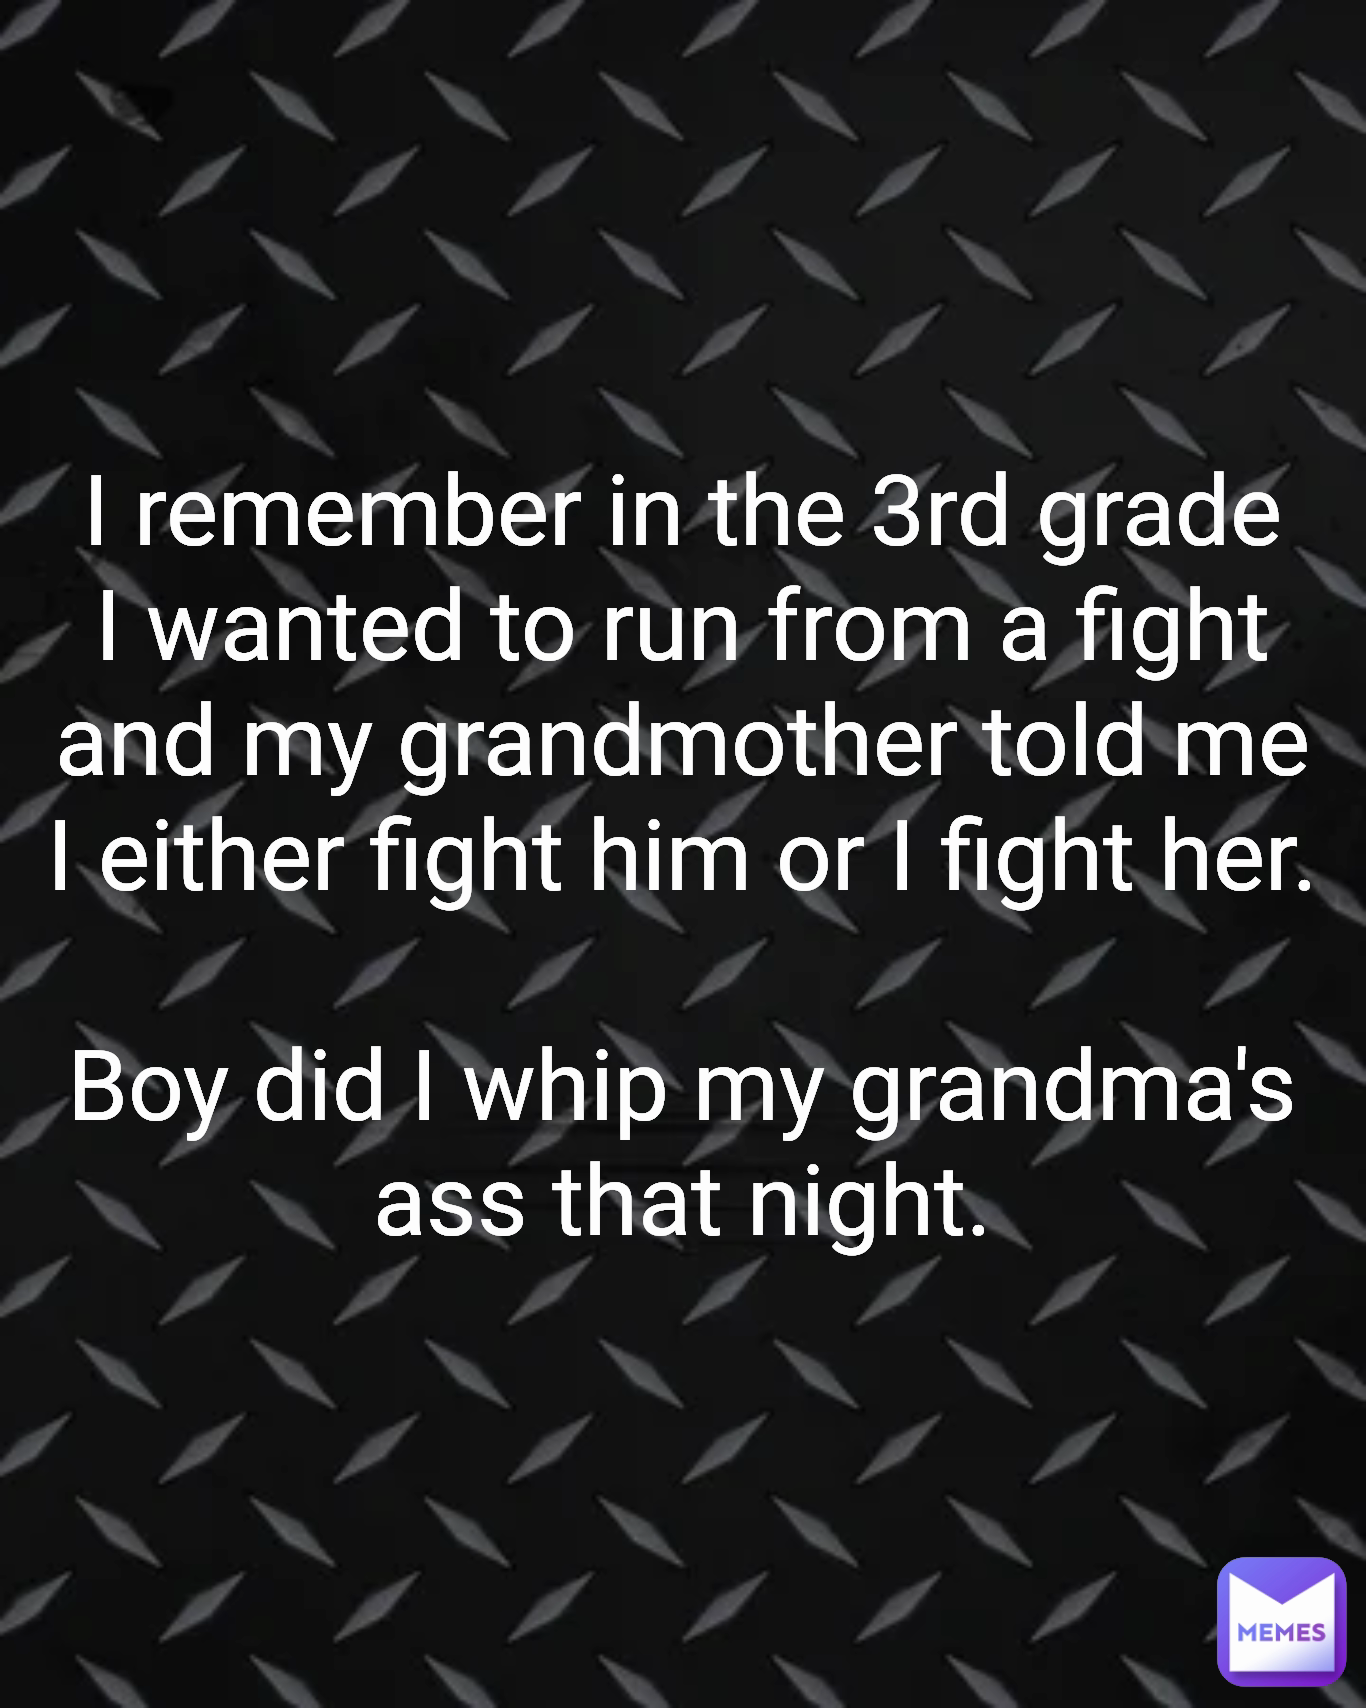 Type Text I remember in the 3rd grade I wanted to run from a fight and my grandmother told me I either fight him or I fight her.

Boy did I whip my grandma's ass that night.